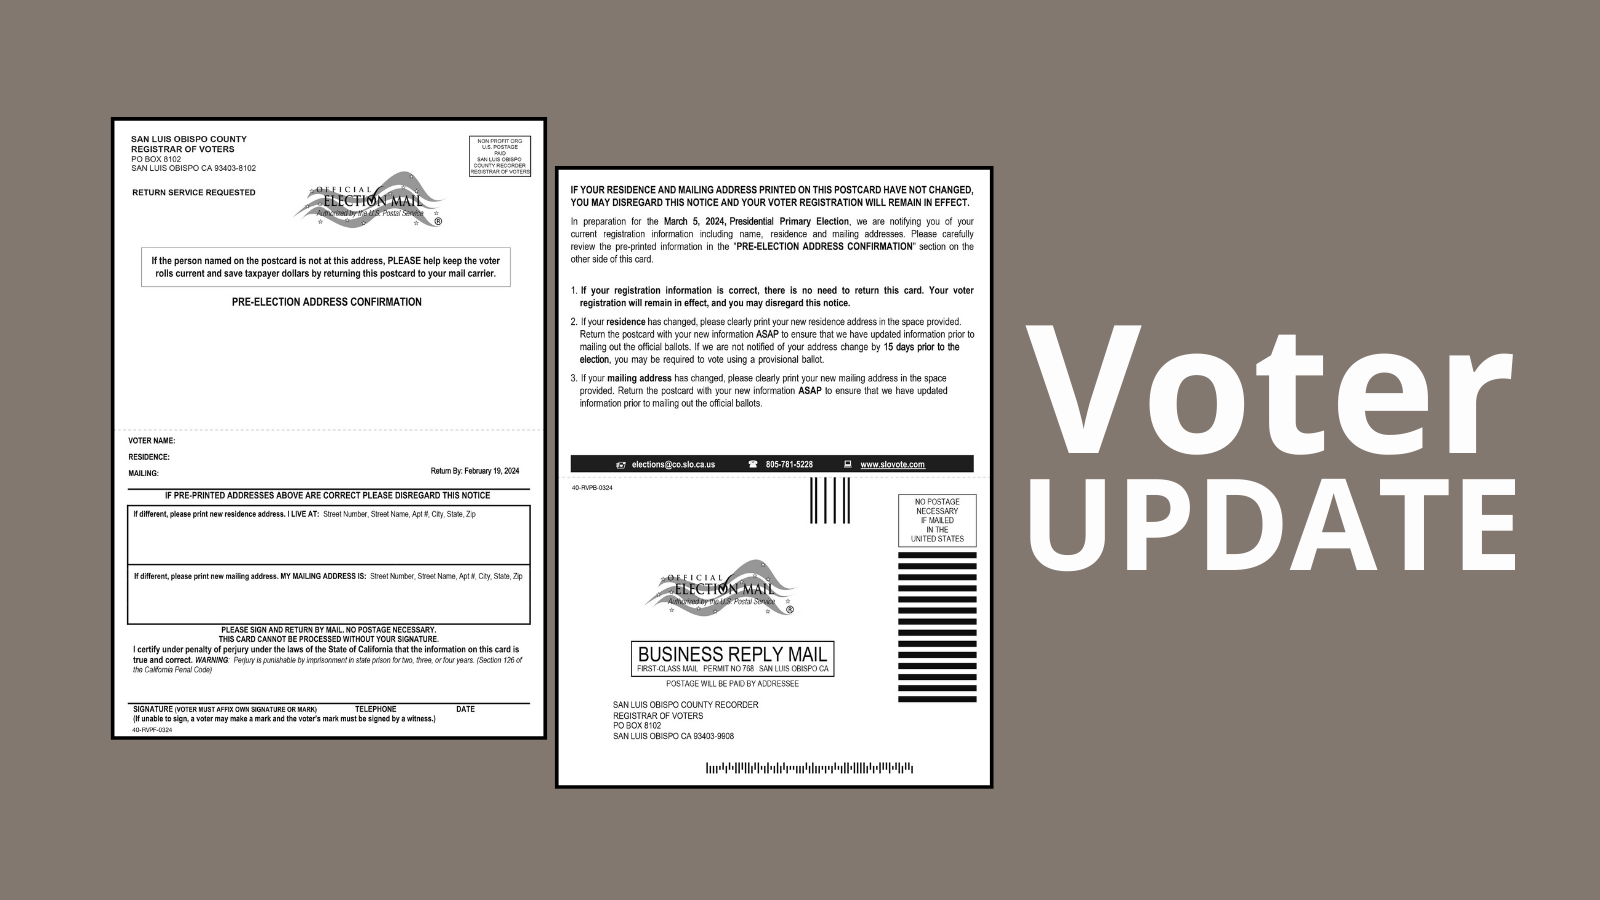 An image of a postcard that contains address confirmation information next to text that reads Voter Update Click to view article, Pre-Election Residency Confirmation Postcards Are In The Mail